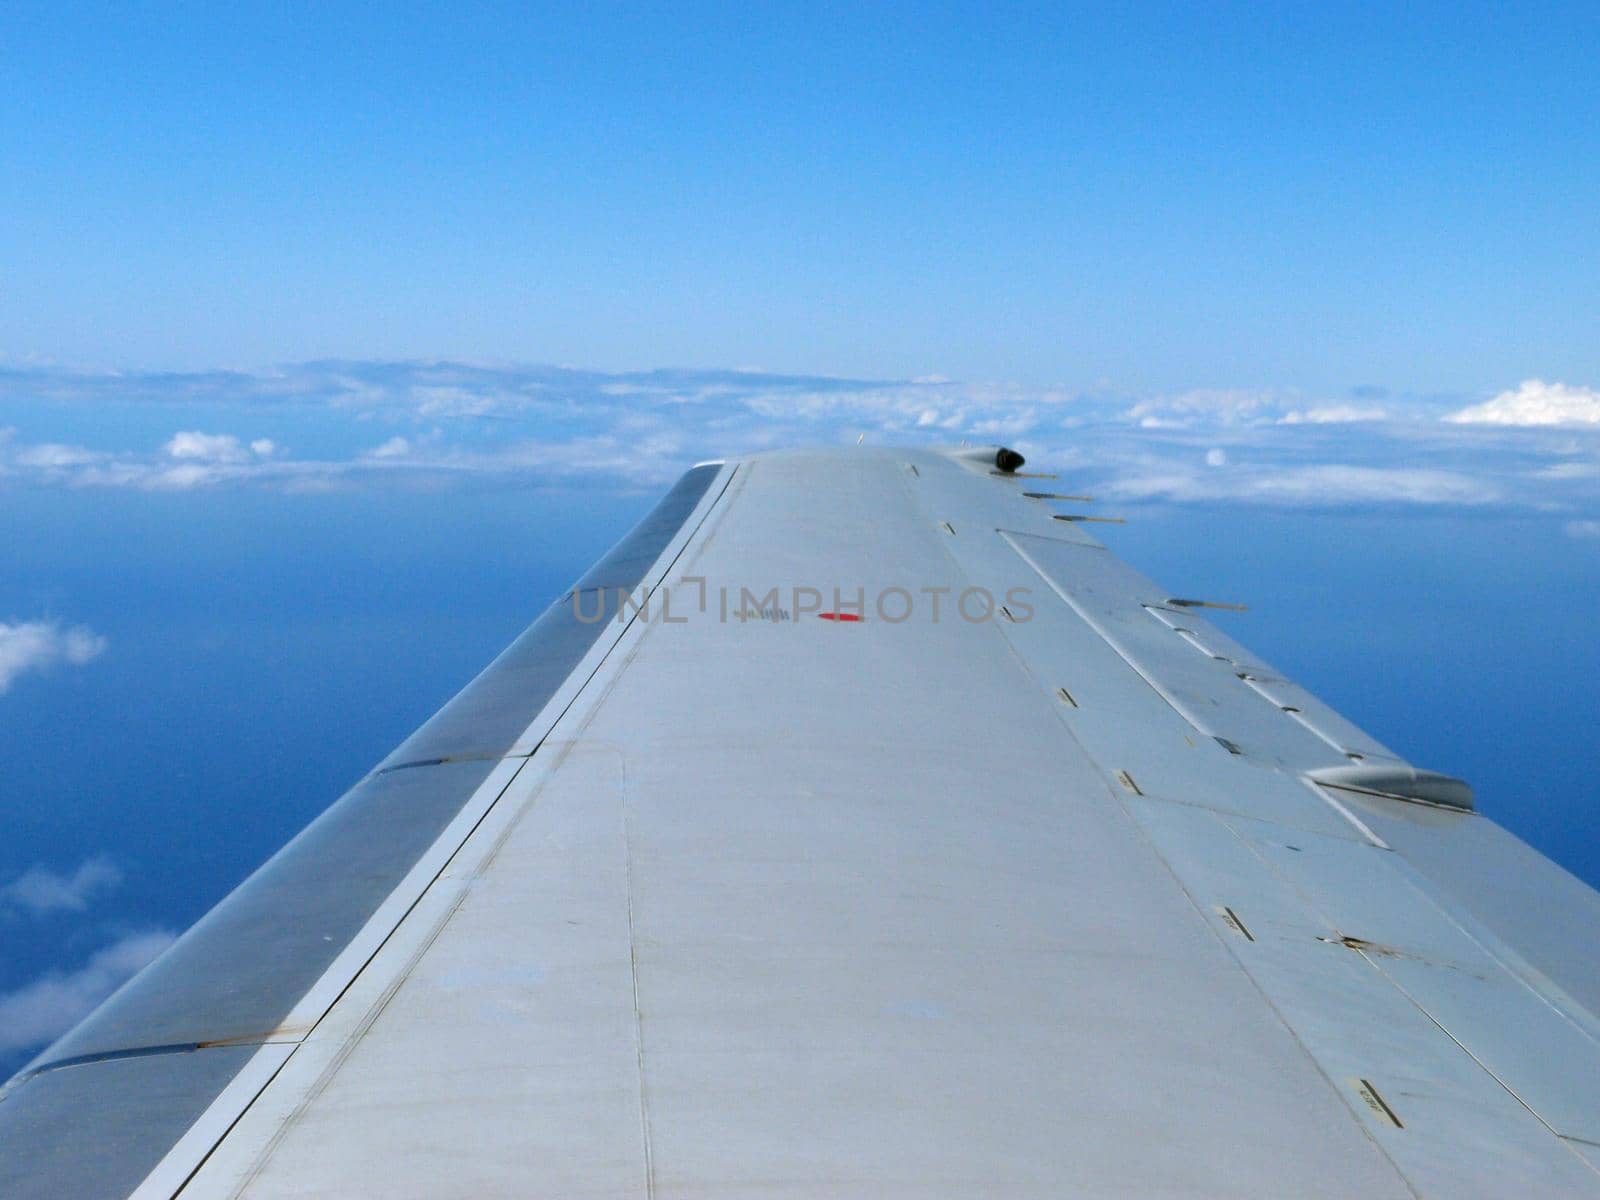 Aerial high in the sky, shot from above the clouds, with the wing of a commercial jet plane and blue skies.